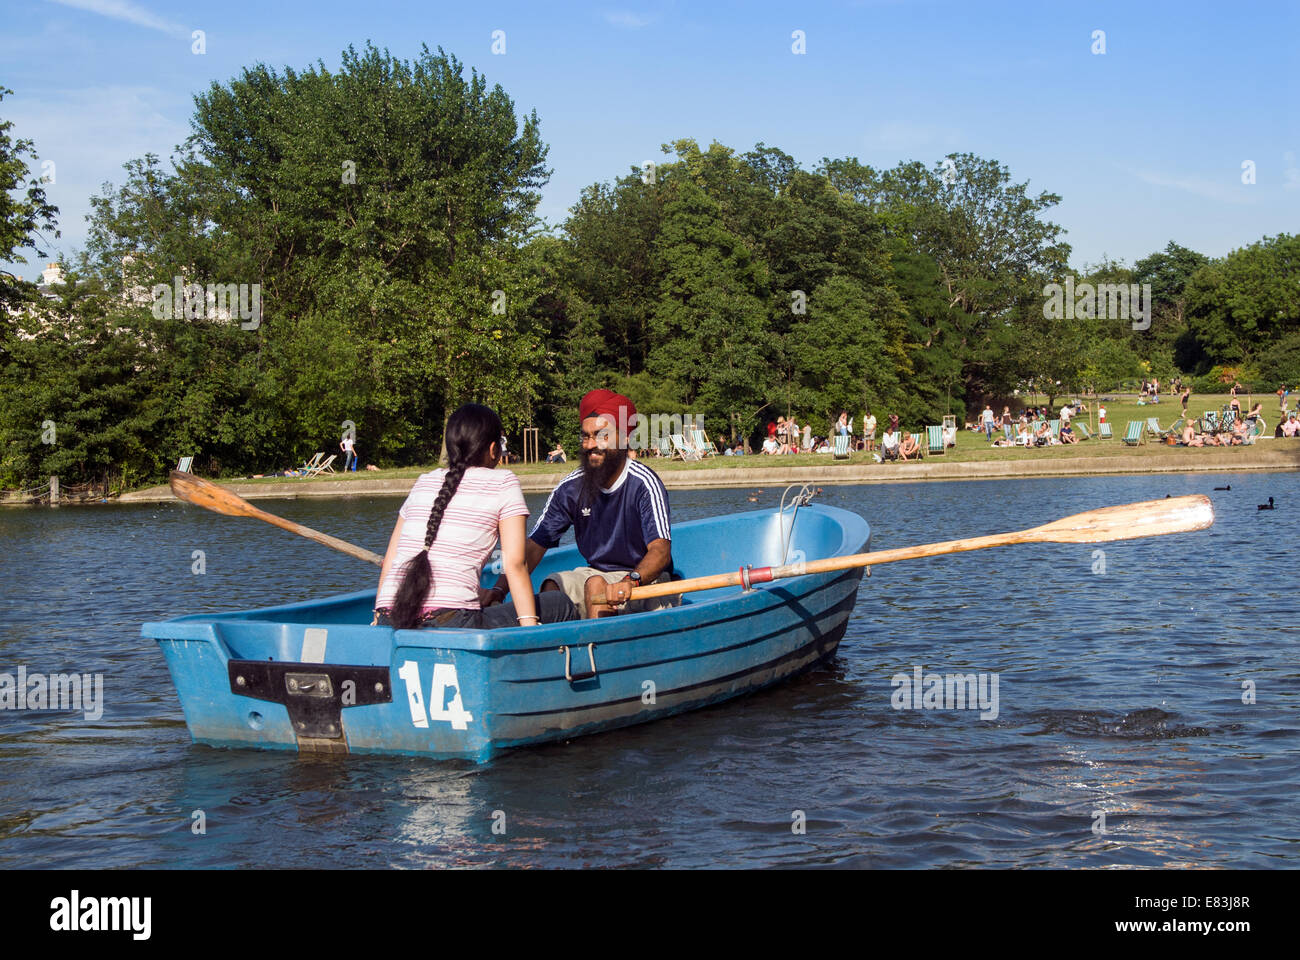 Young Sikh couple rowing on the boating lake in Regent's Park, London, England, UK Stock Photo